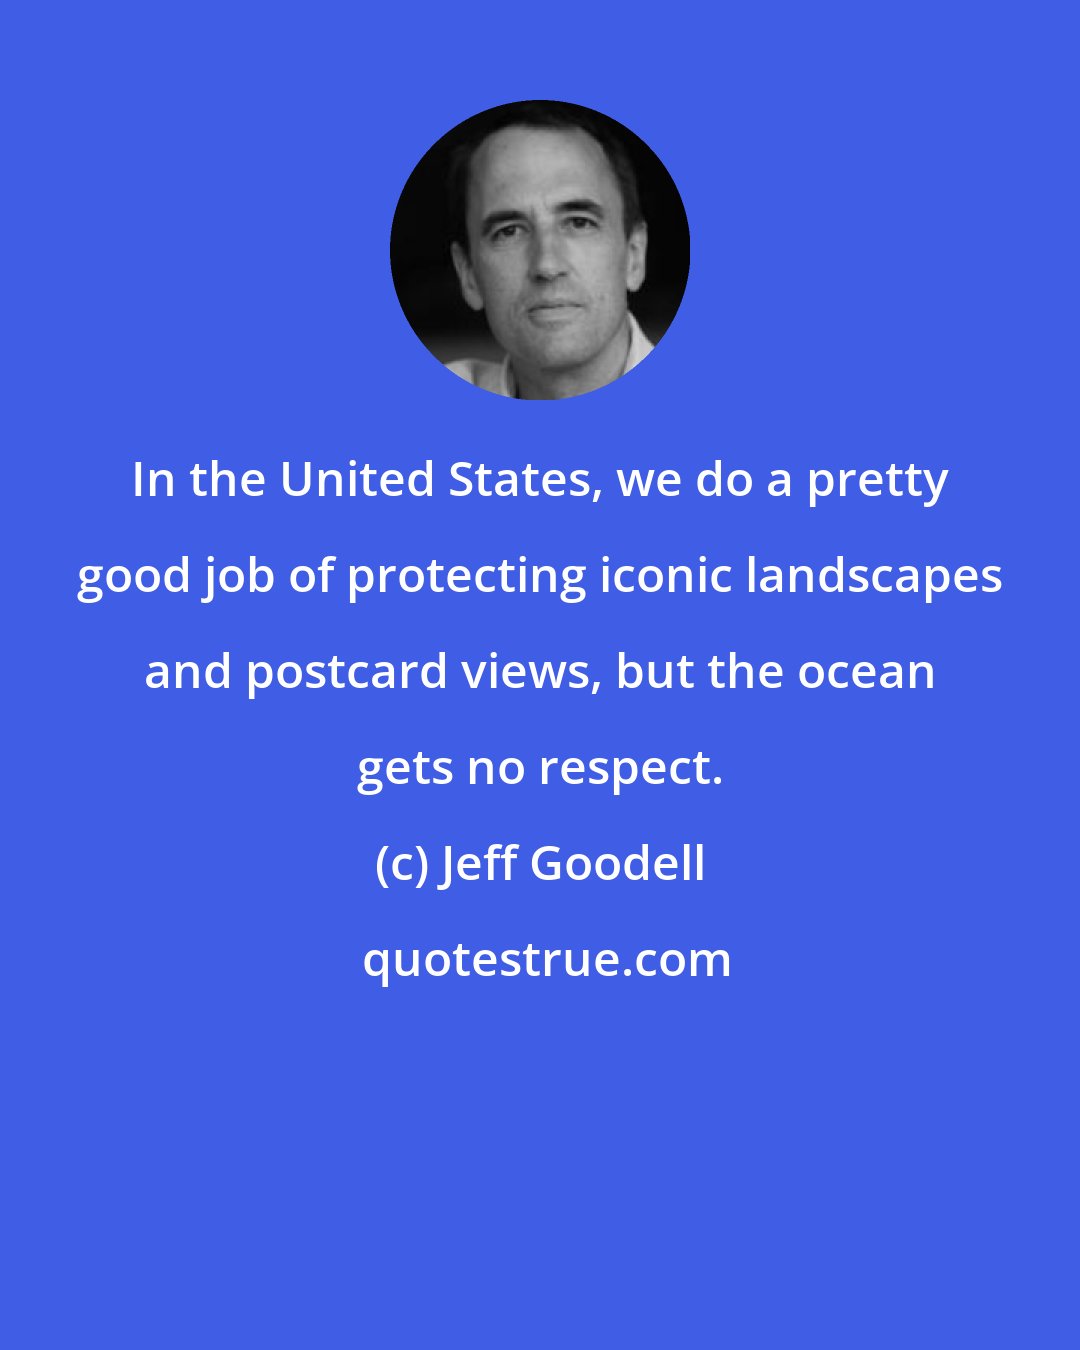 Jeff Goodell: In the United States, we do a pretty good job of protecting iconic landscapes and postcard views, but the ocean gets no respect.